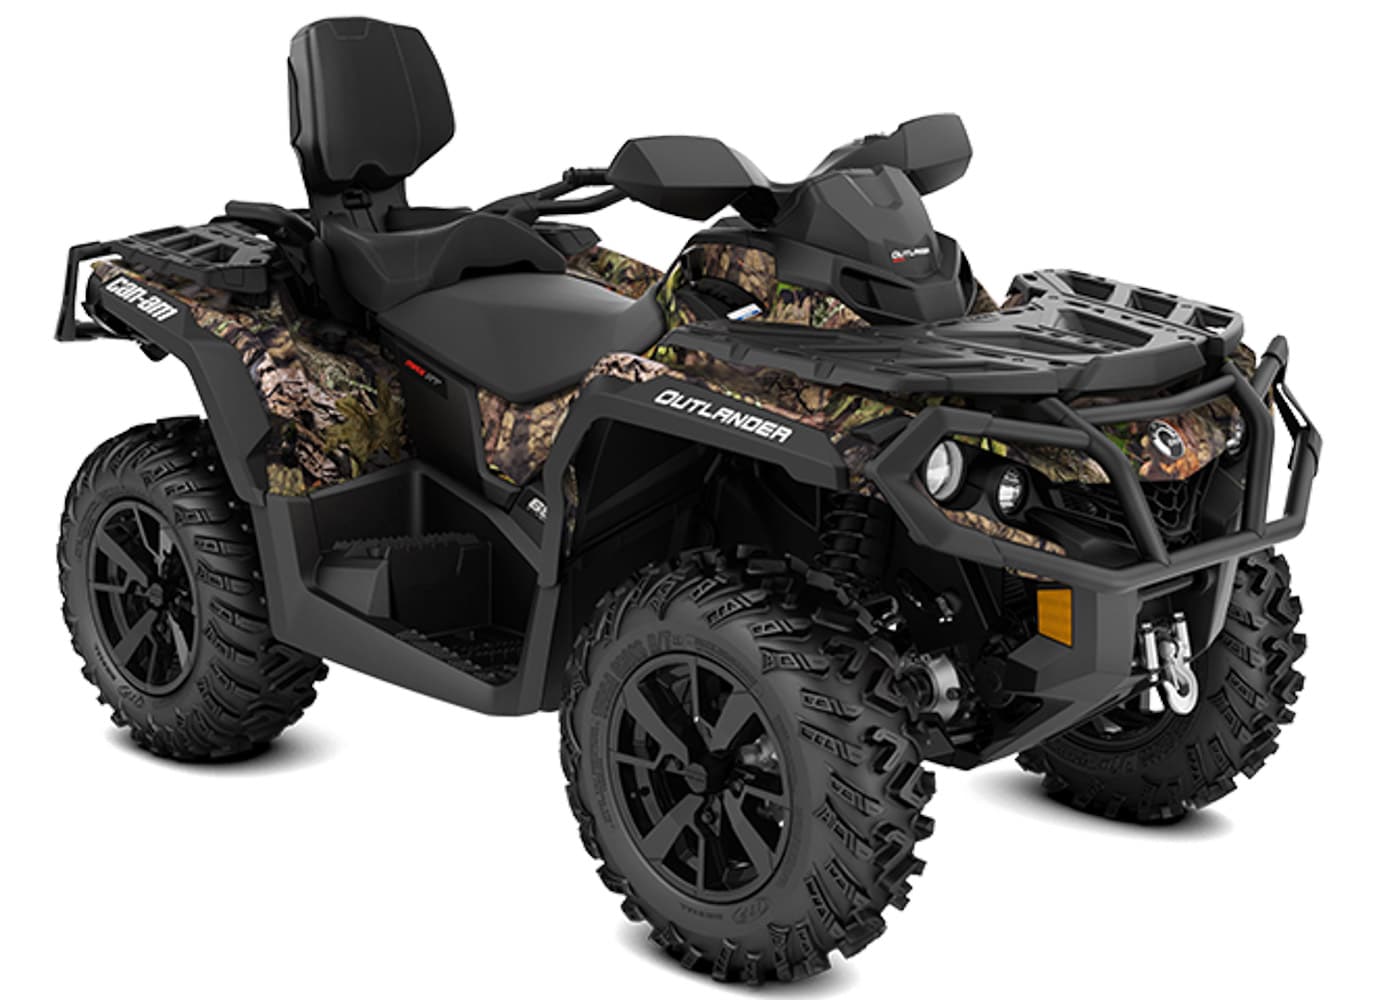 The Five Top ATV's to Buy in 2022